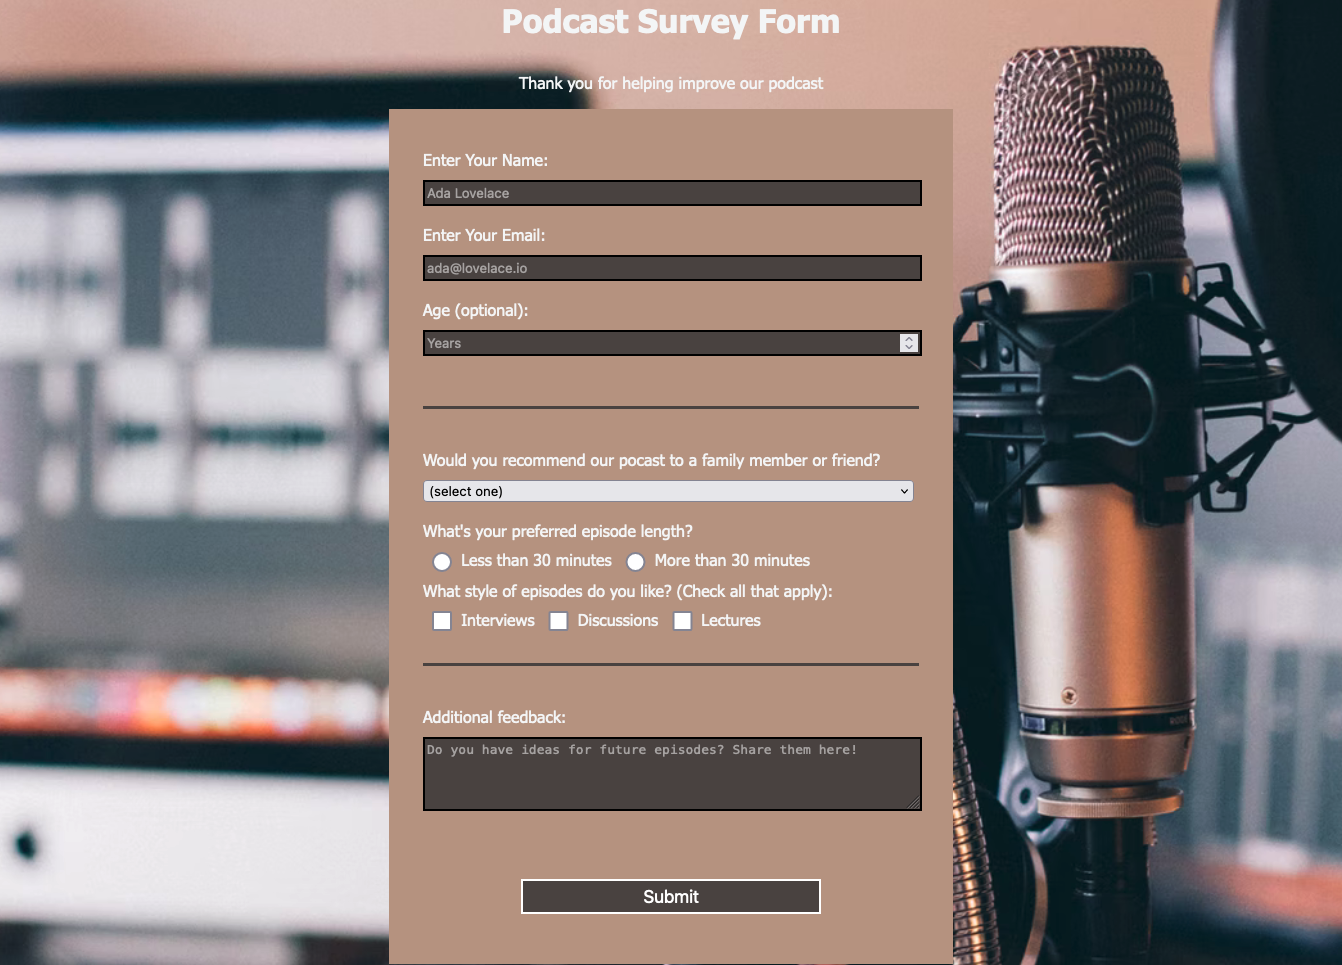 survey form for a podcast asking for listener feedback on how they like the episodes